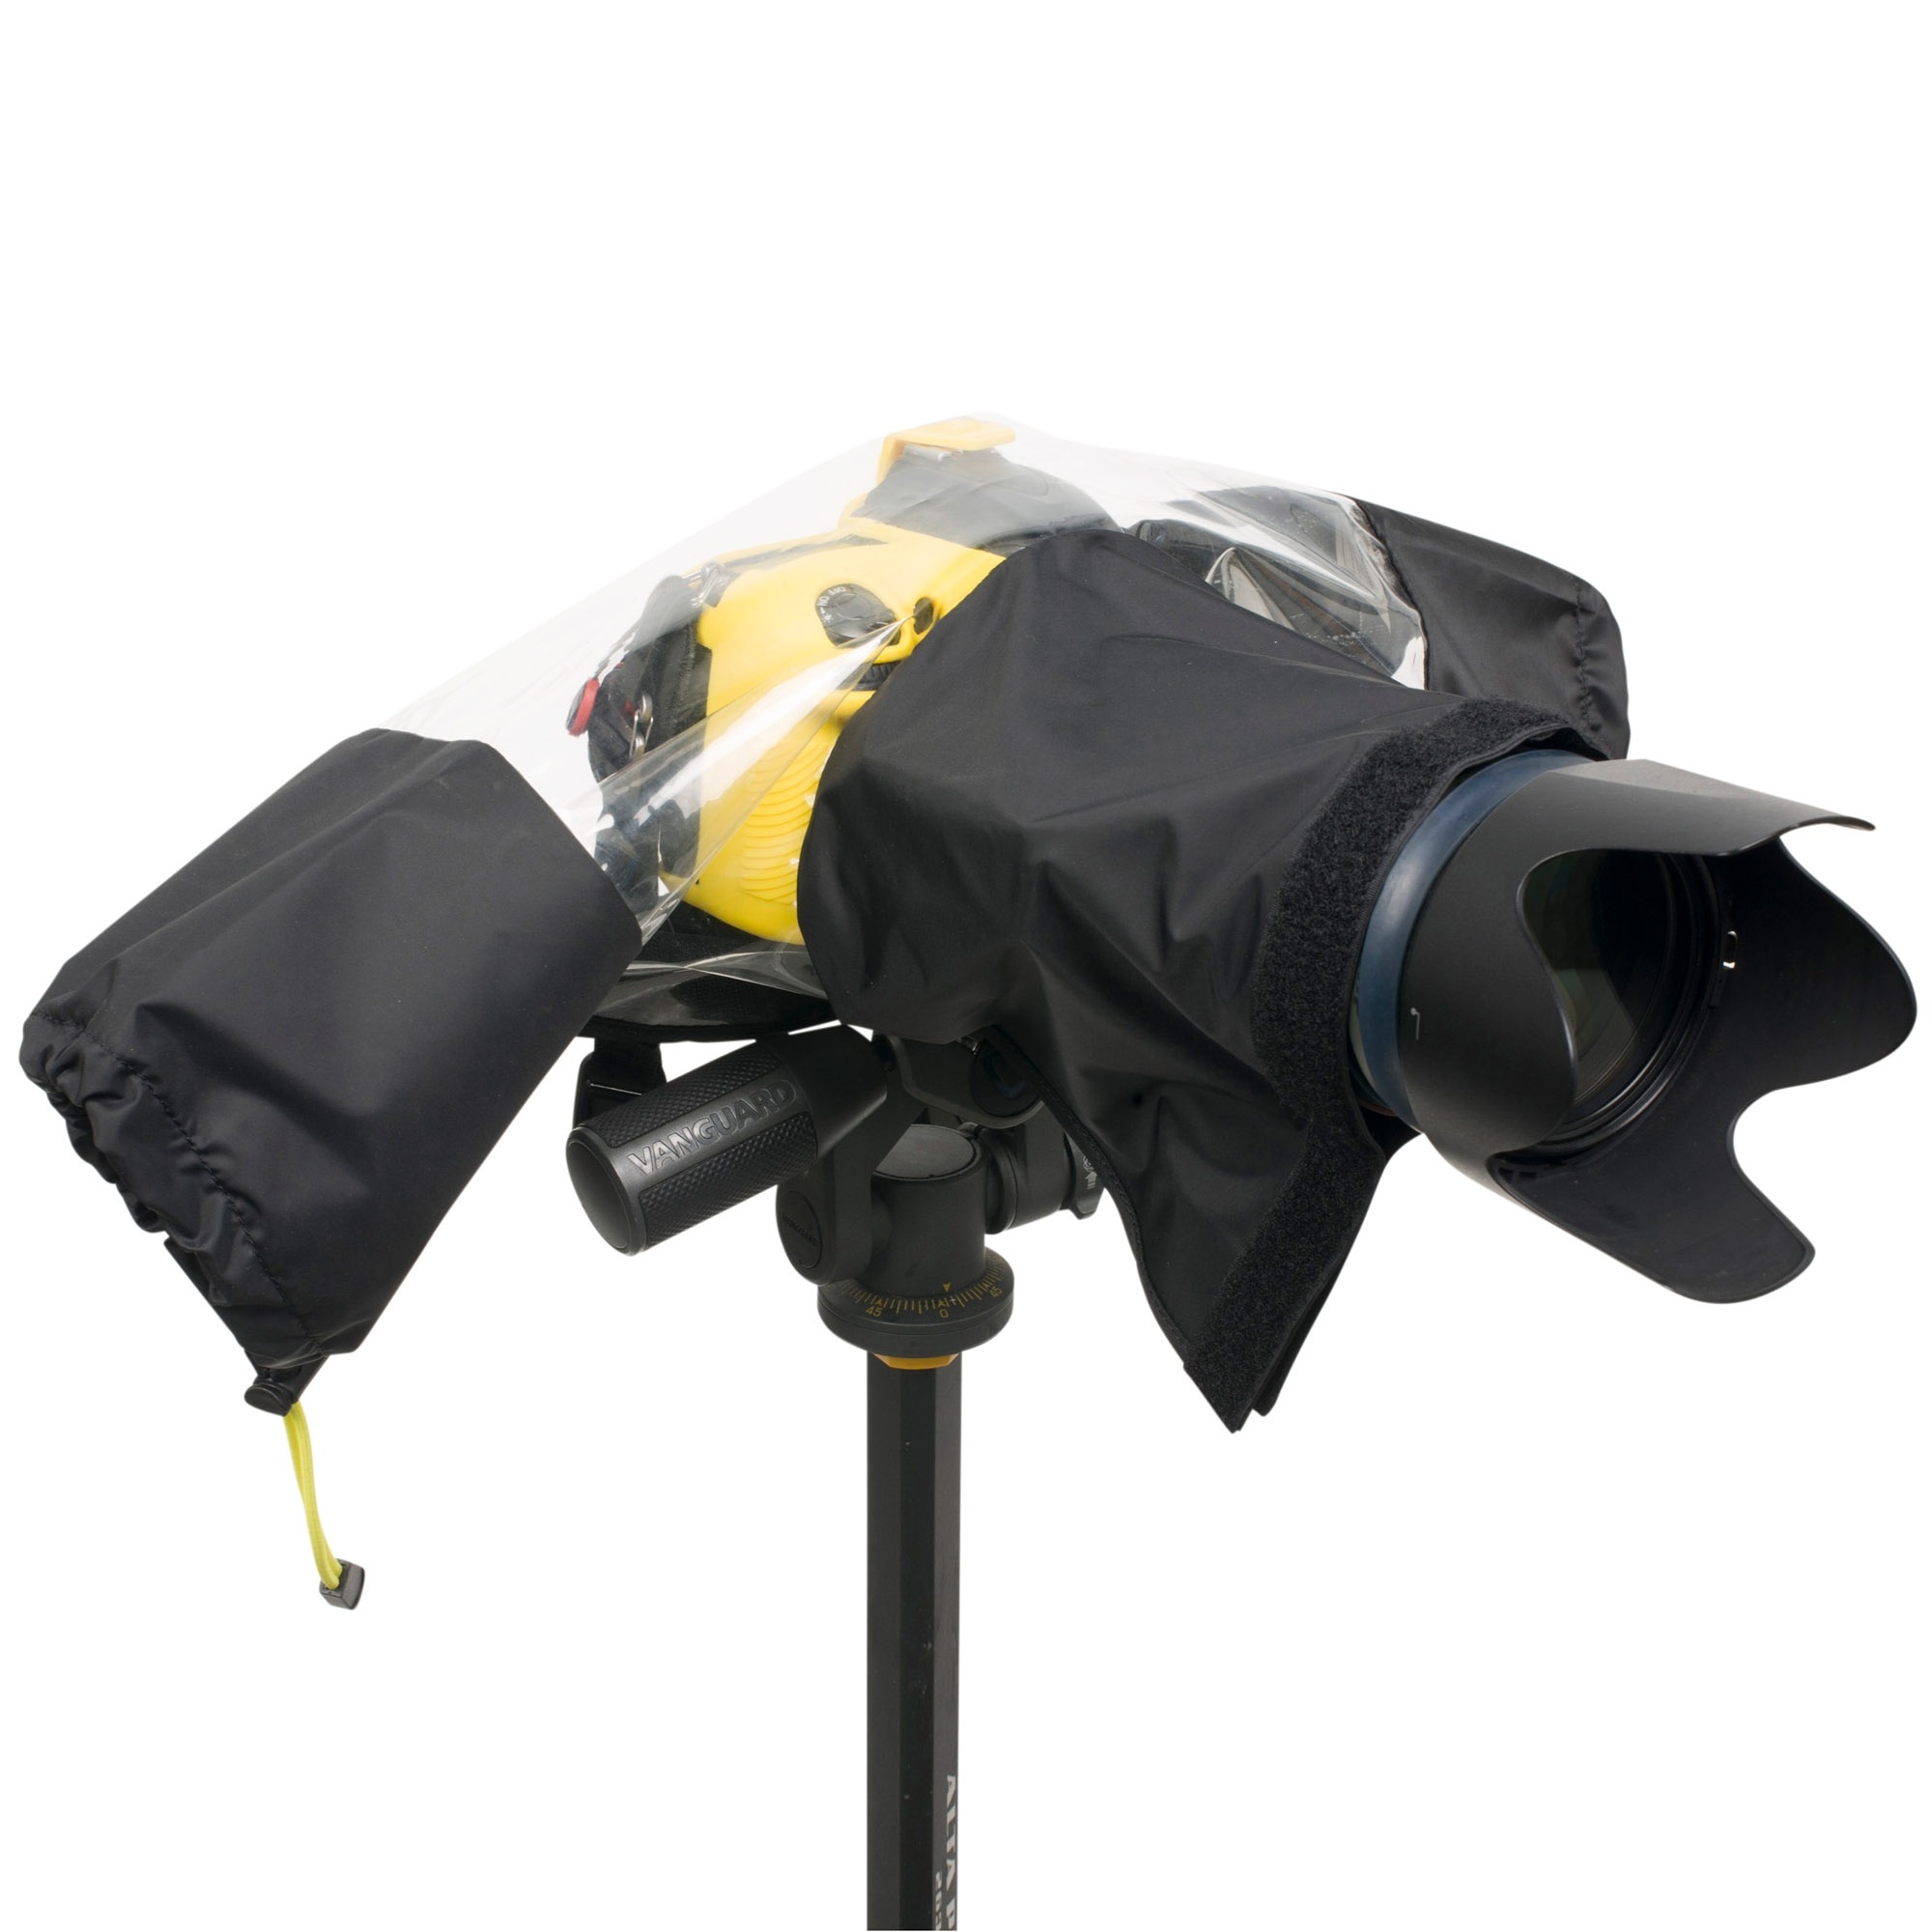 ORCA OR-580 Rain Cover for Mirrorless and DSLR Cameras with up to 70-200 Lens